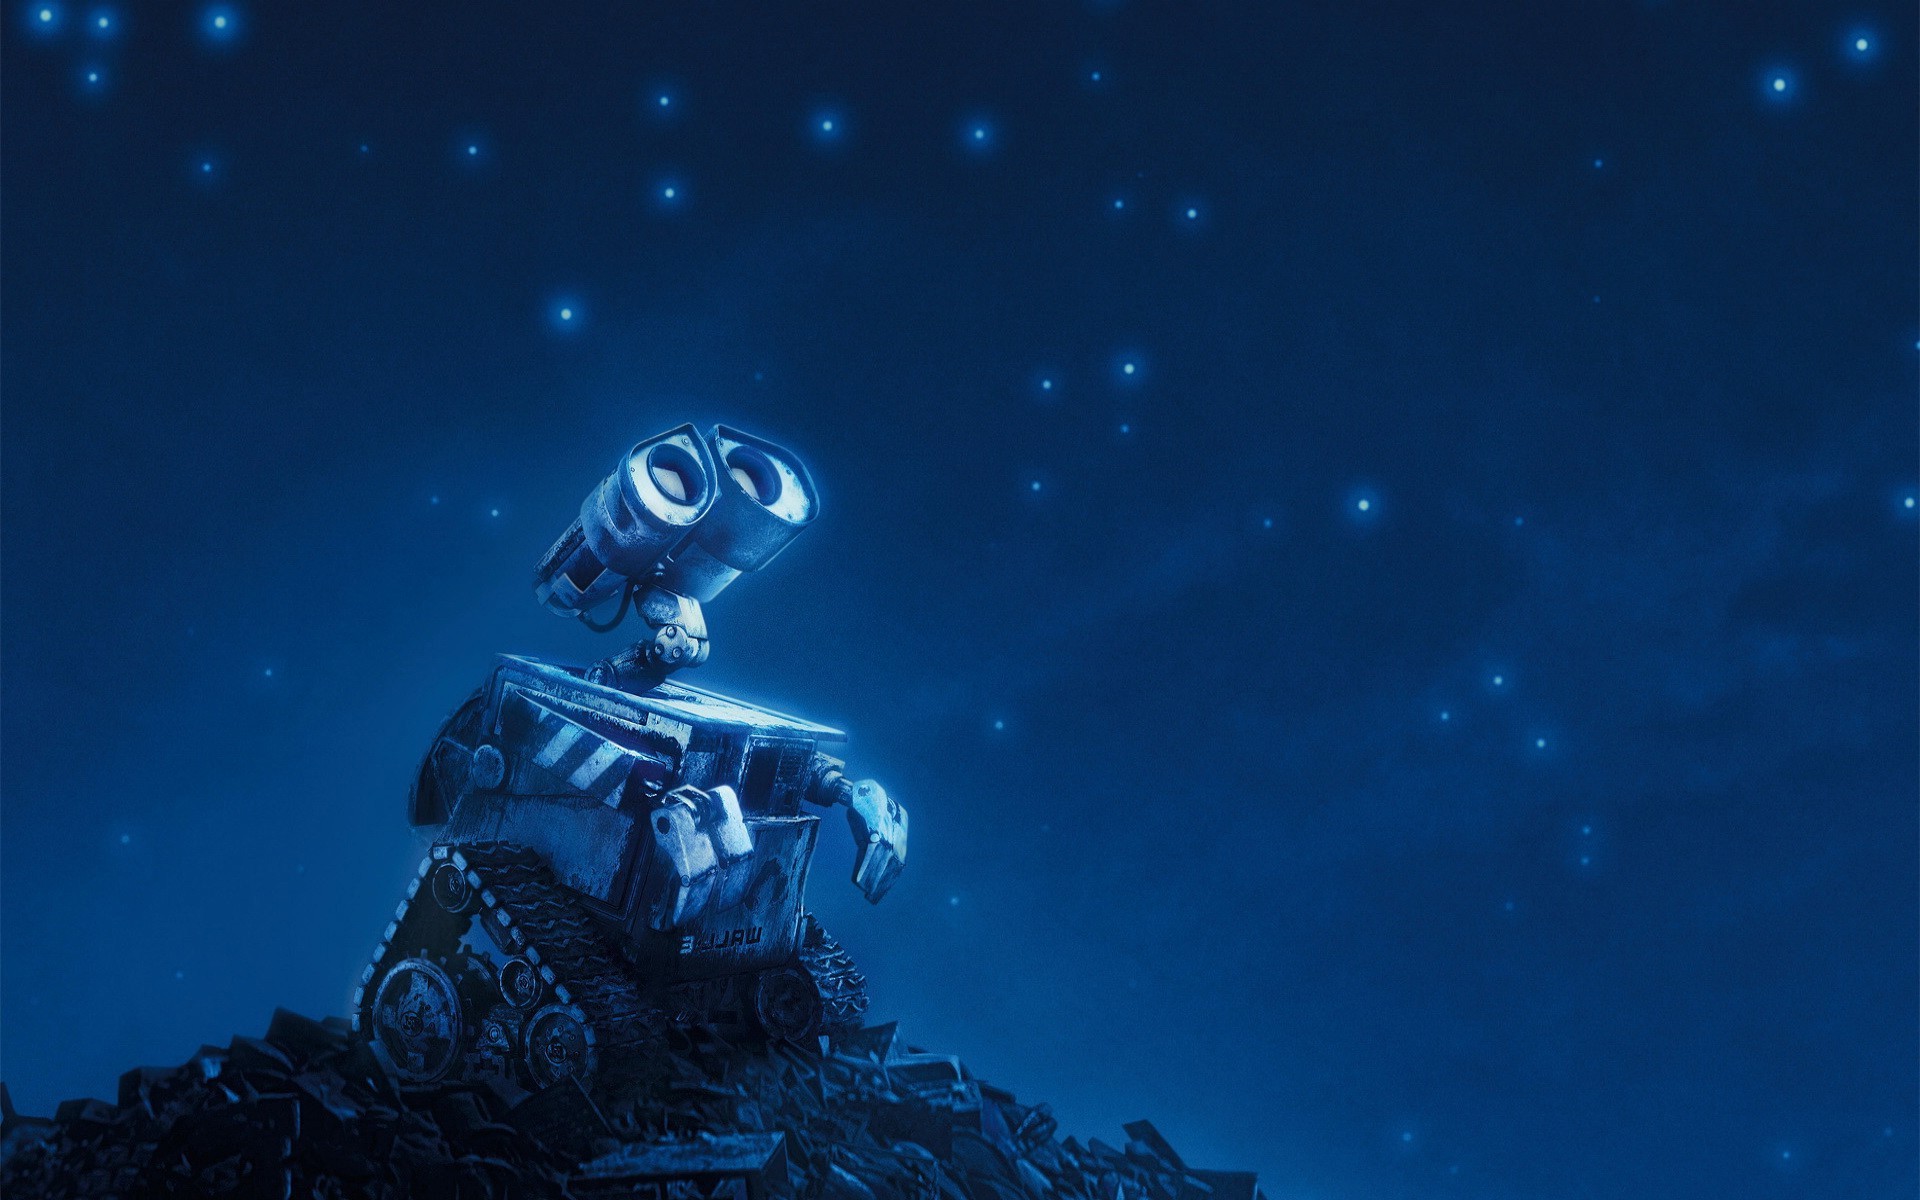 Walle, dreaming, robot, funny, space, midnight